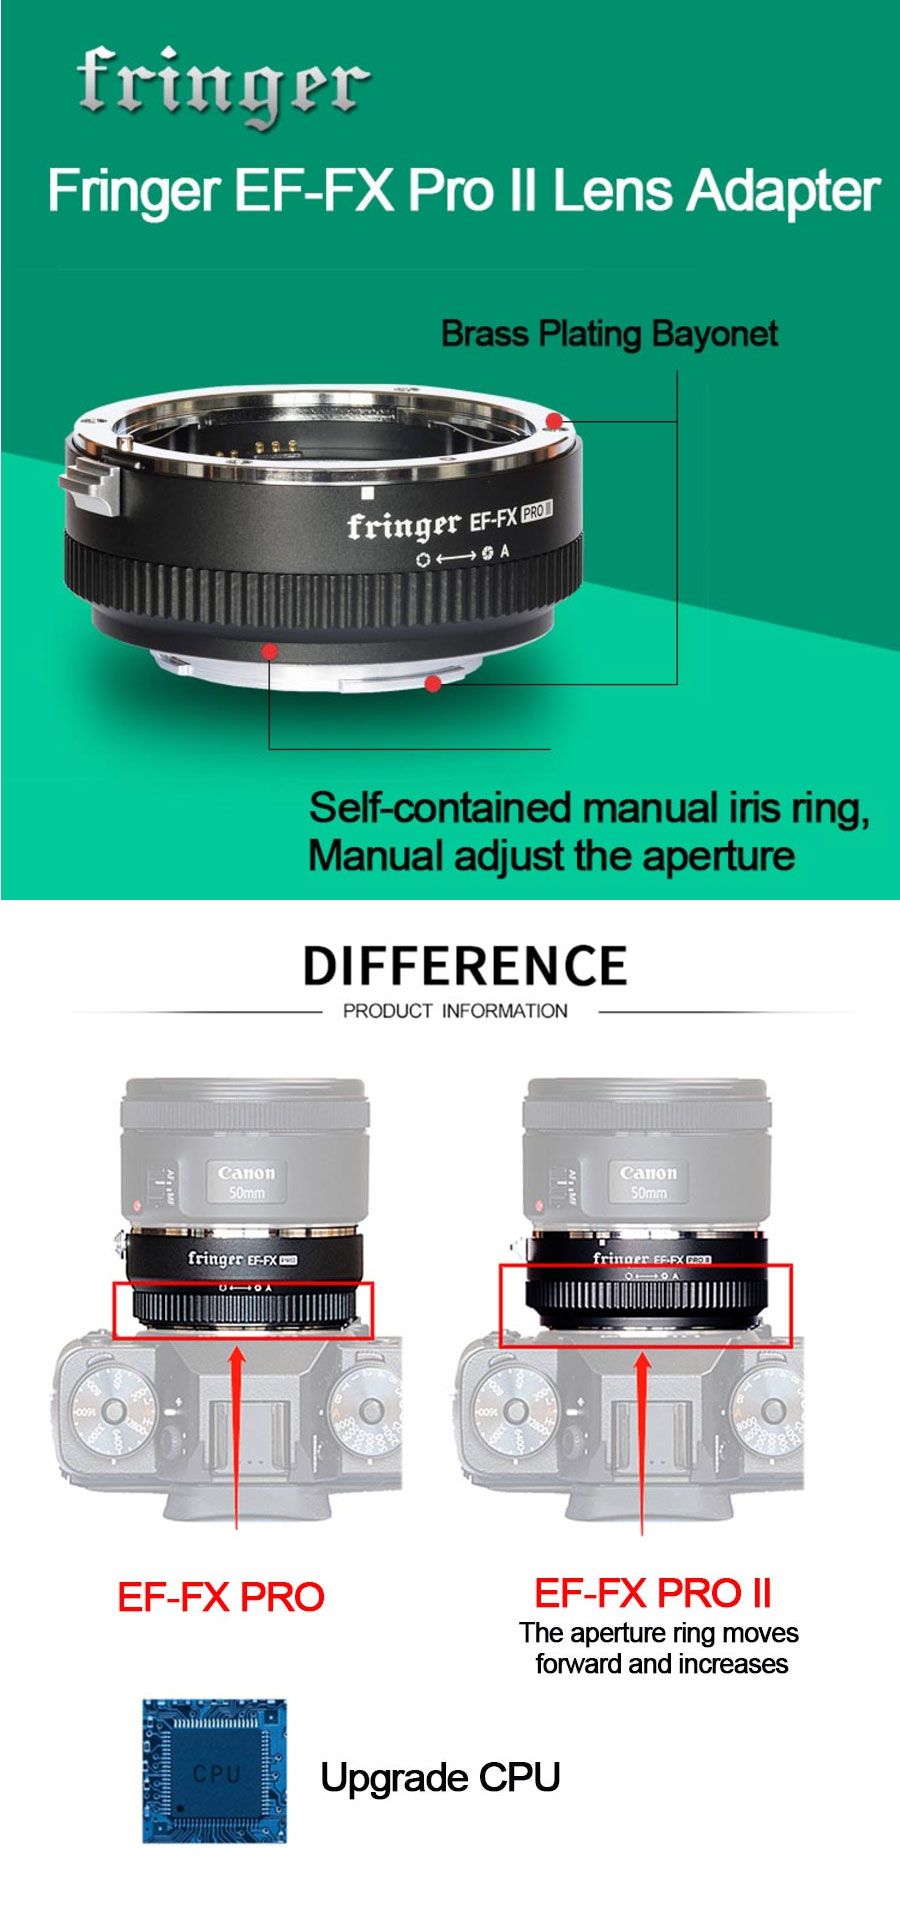 Fringer-EF-FX2-Pro-II-Auto-focus-Mount-Lens-Adapter-Built-in-Electronic-Aperture-for-Canon-EOS-for-S-1556294